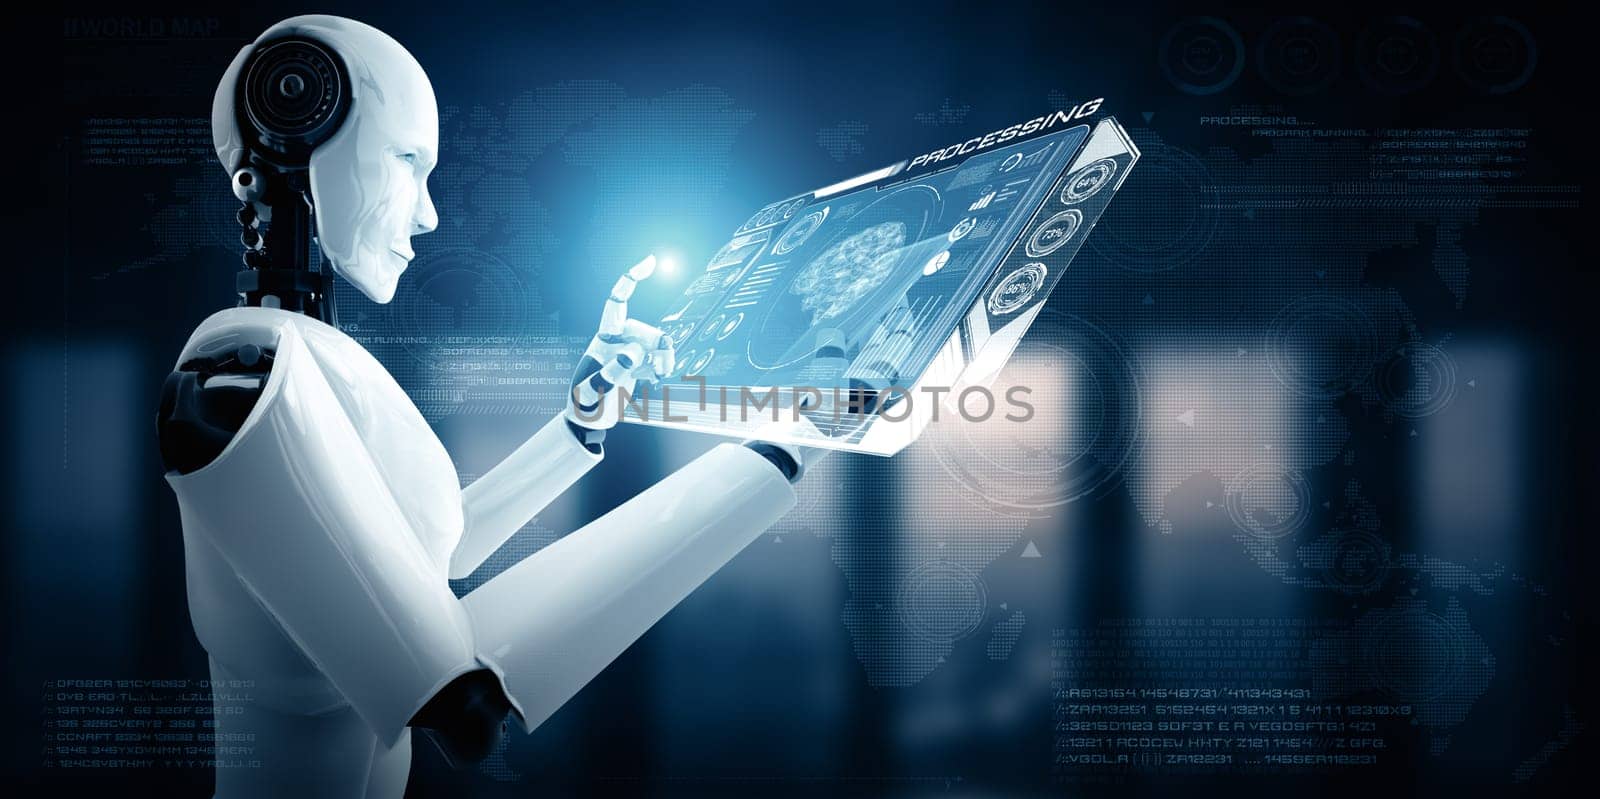 XAI 3d illustration Robot humanoid use mobile phone or tablet in concept of AI thinking brain , artificial intelligence and machine learning process for the 4th fourth industrial revolution. 3D illustration.